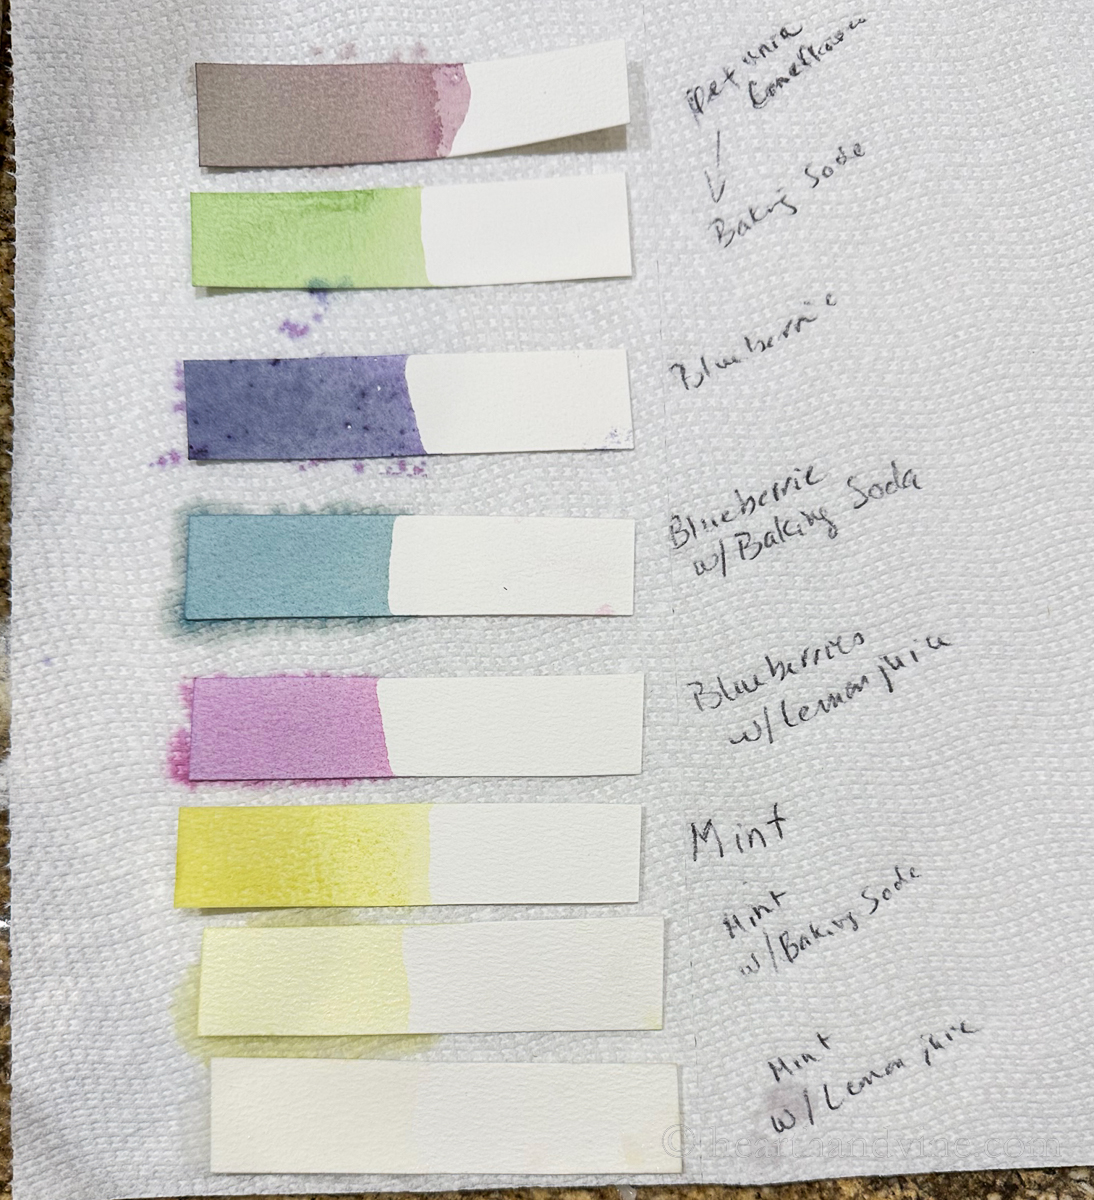 Strips of watercolor paper dipped into different batches of dye. Set on a paper towel and labeled on the side how they were made.